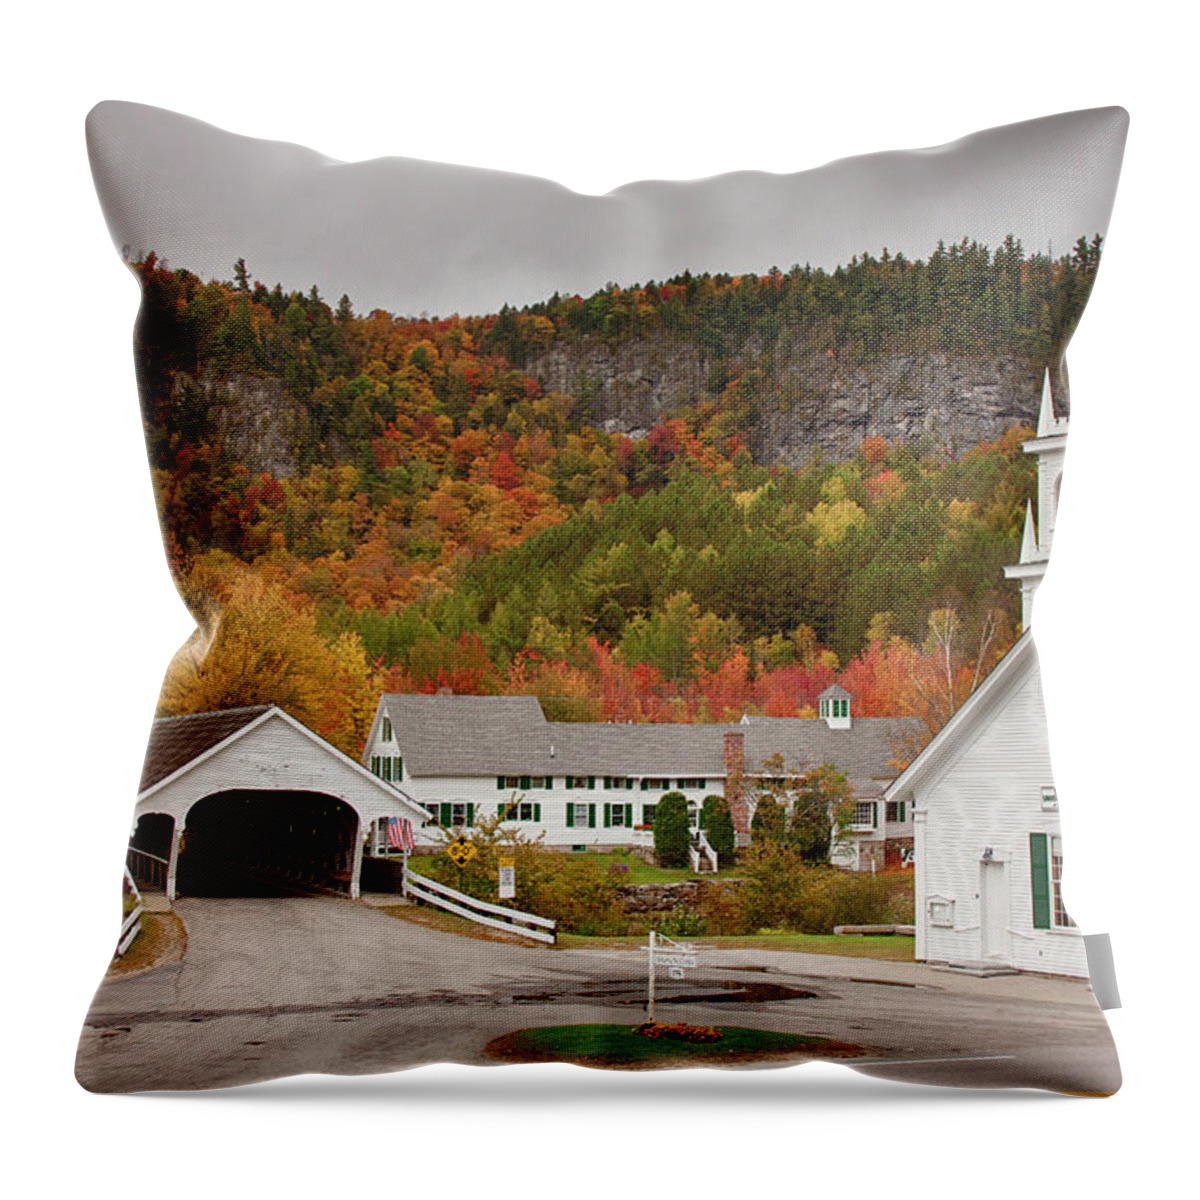 Autumn Throw Pillow featuring the photograph Stark Covered Bridge by Jeff Folger